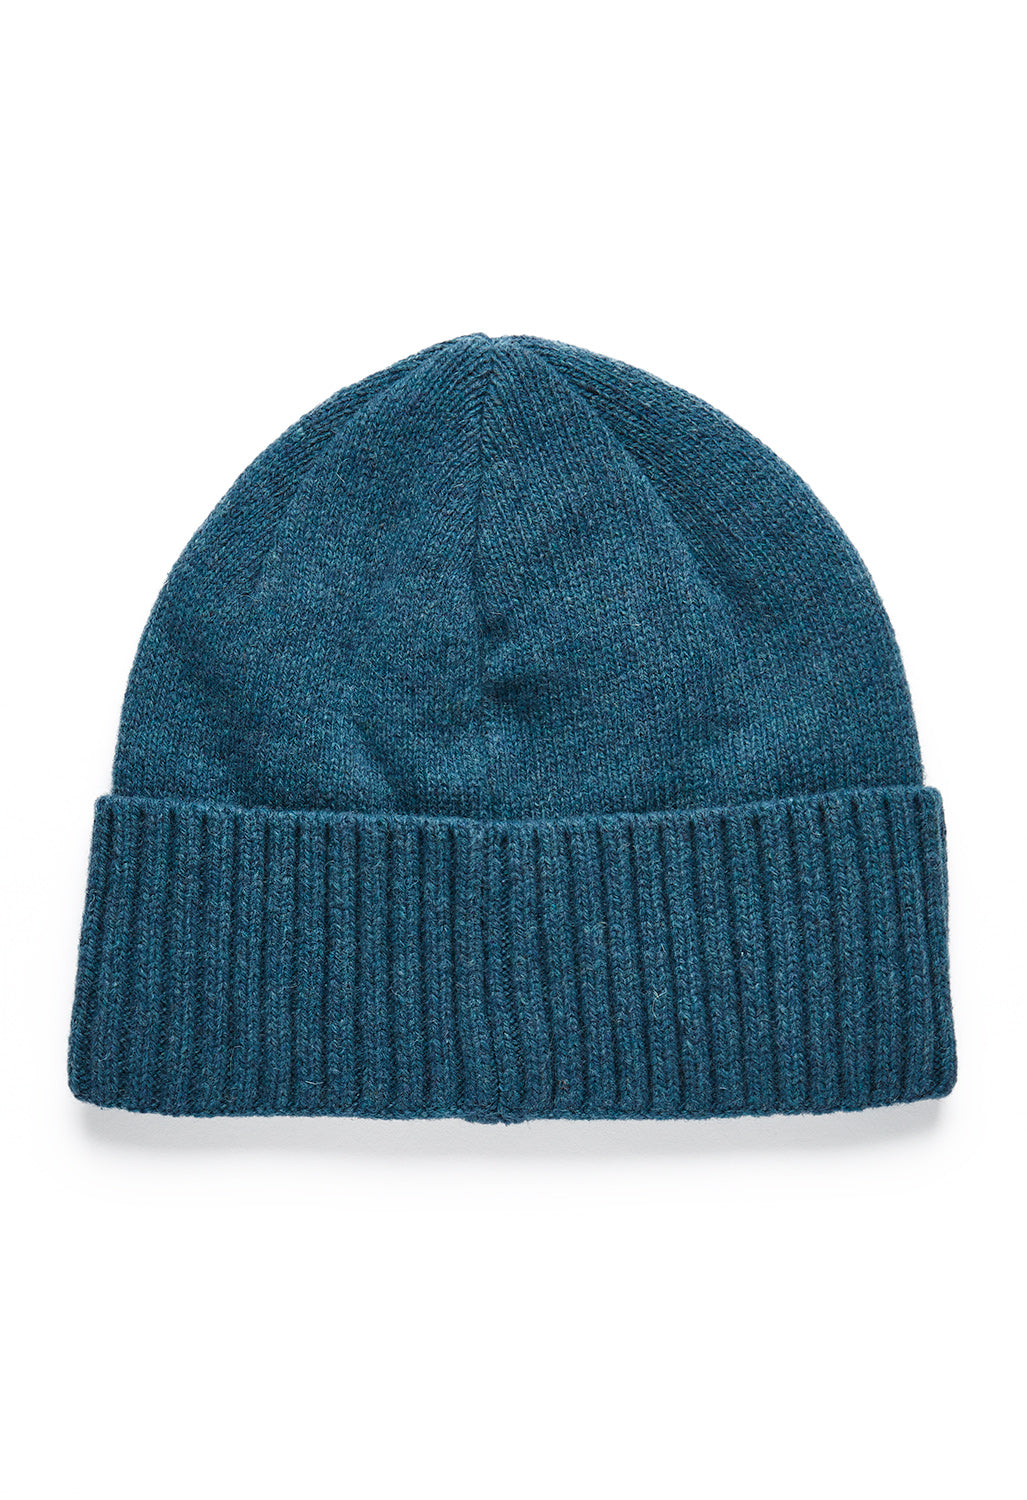 Patagonia Brodeo Beanie - Abalone Blue